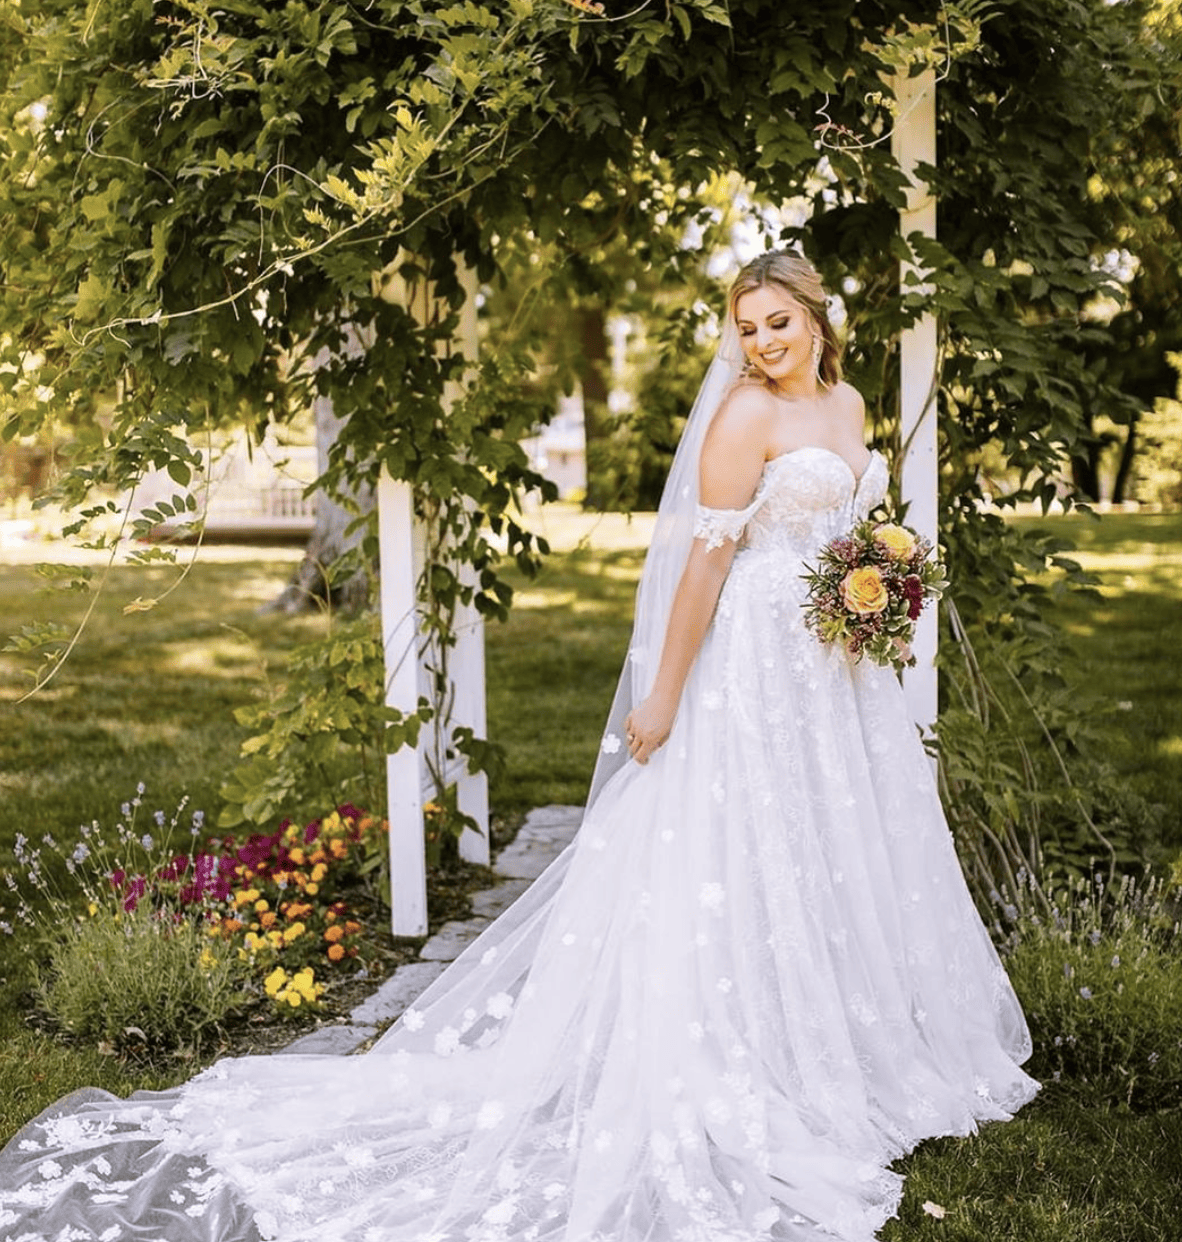 Bride standing next to a gazebo with a beautiful train